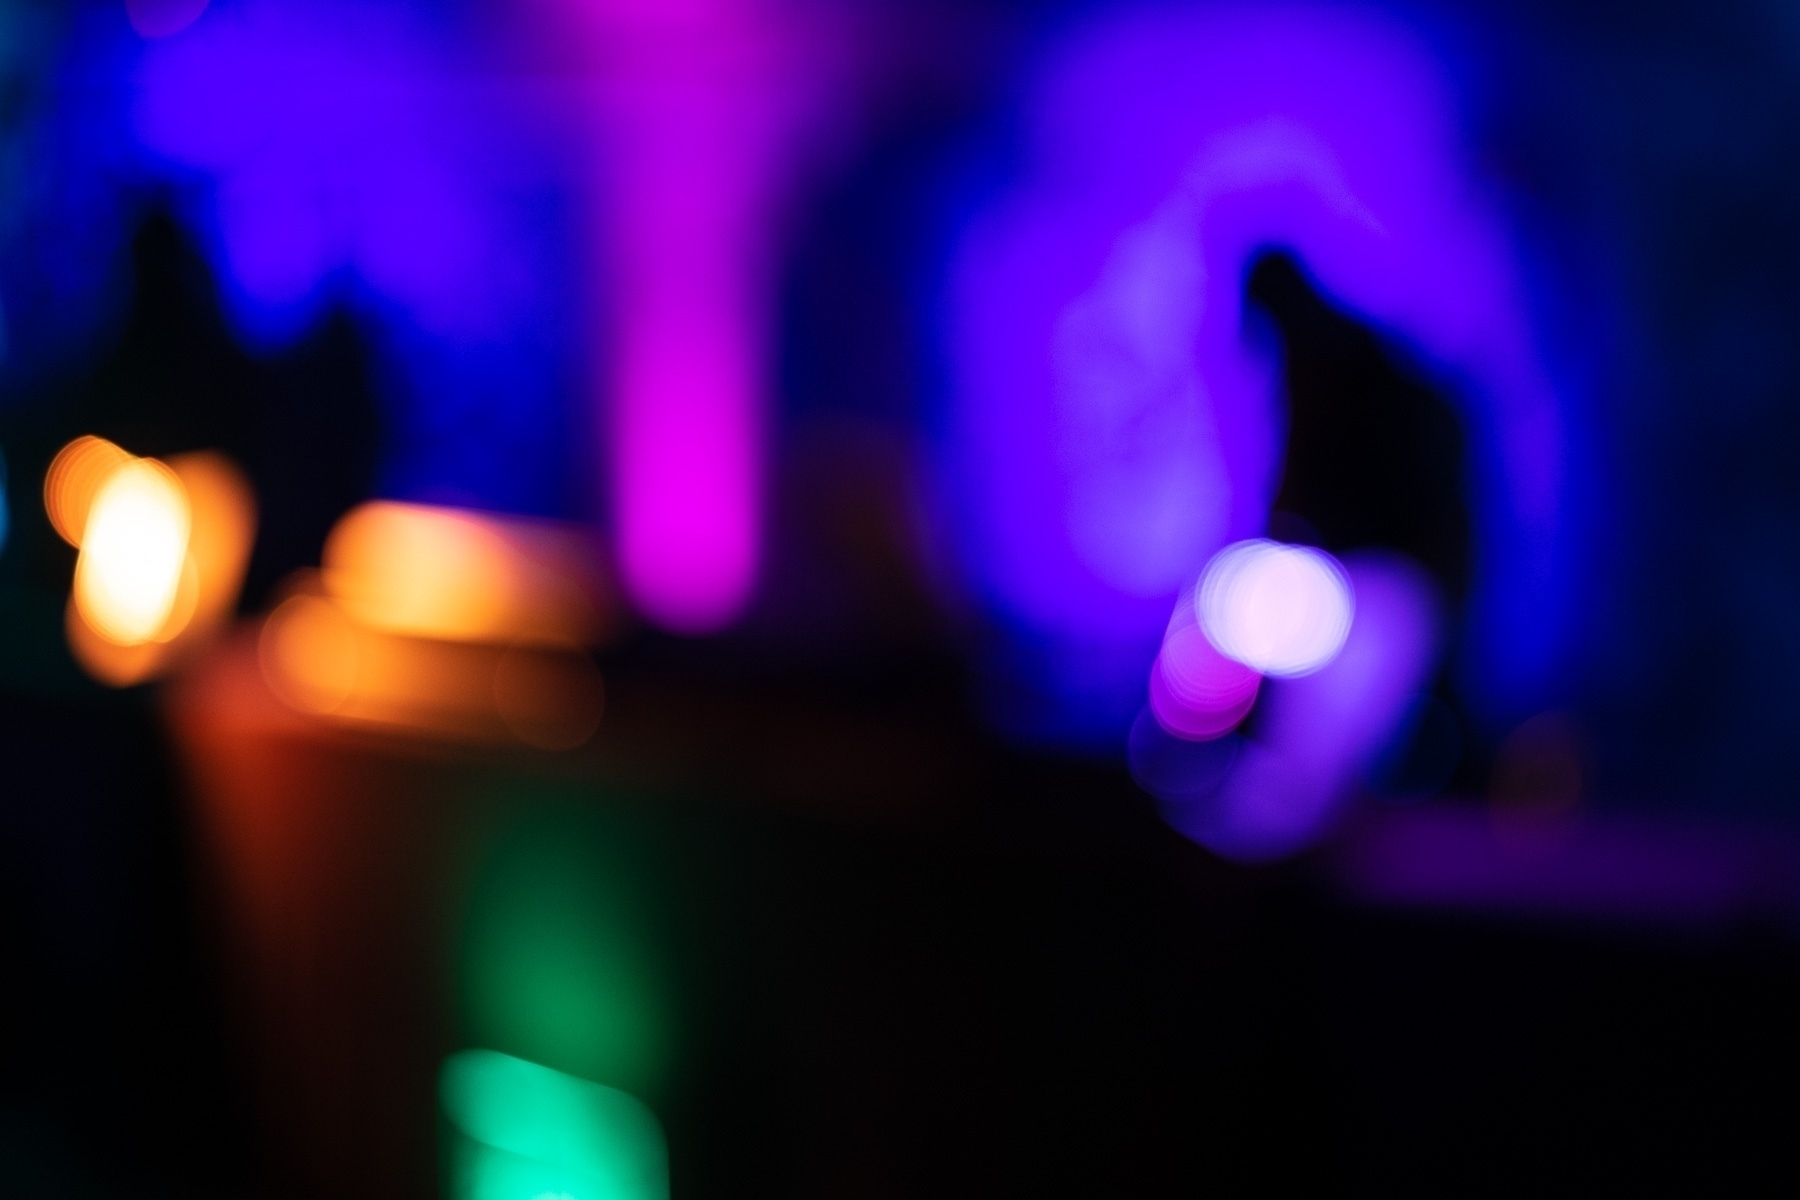 An out of focus image of blurry blobs of color and bokeh on a black background.